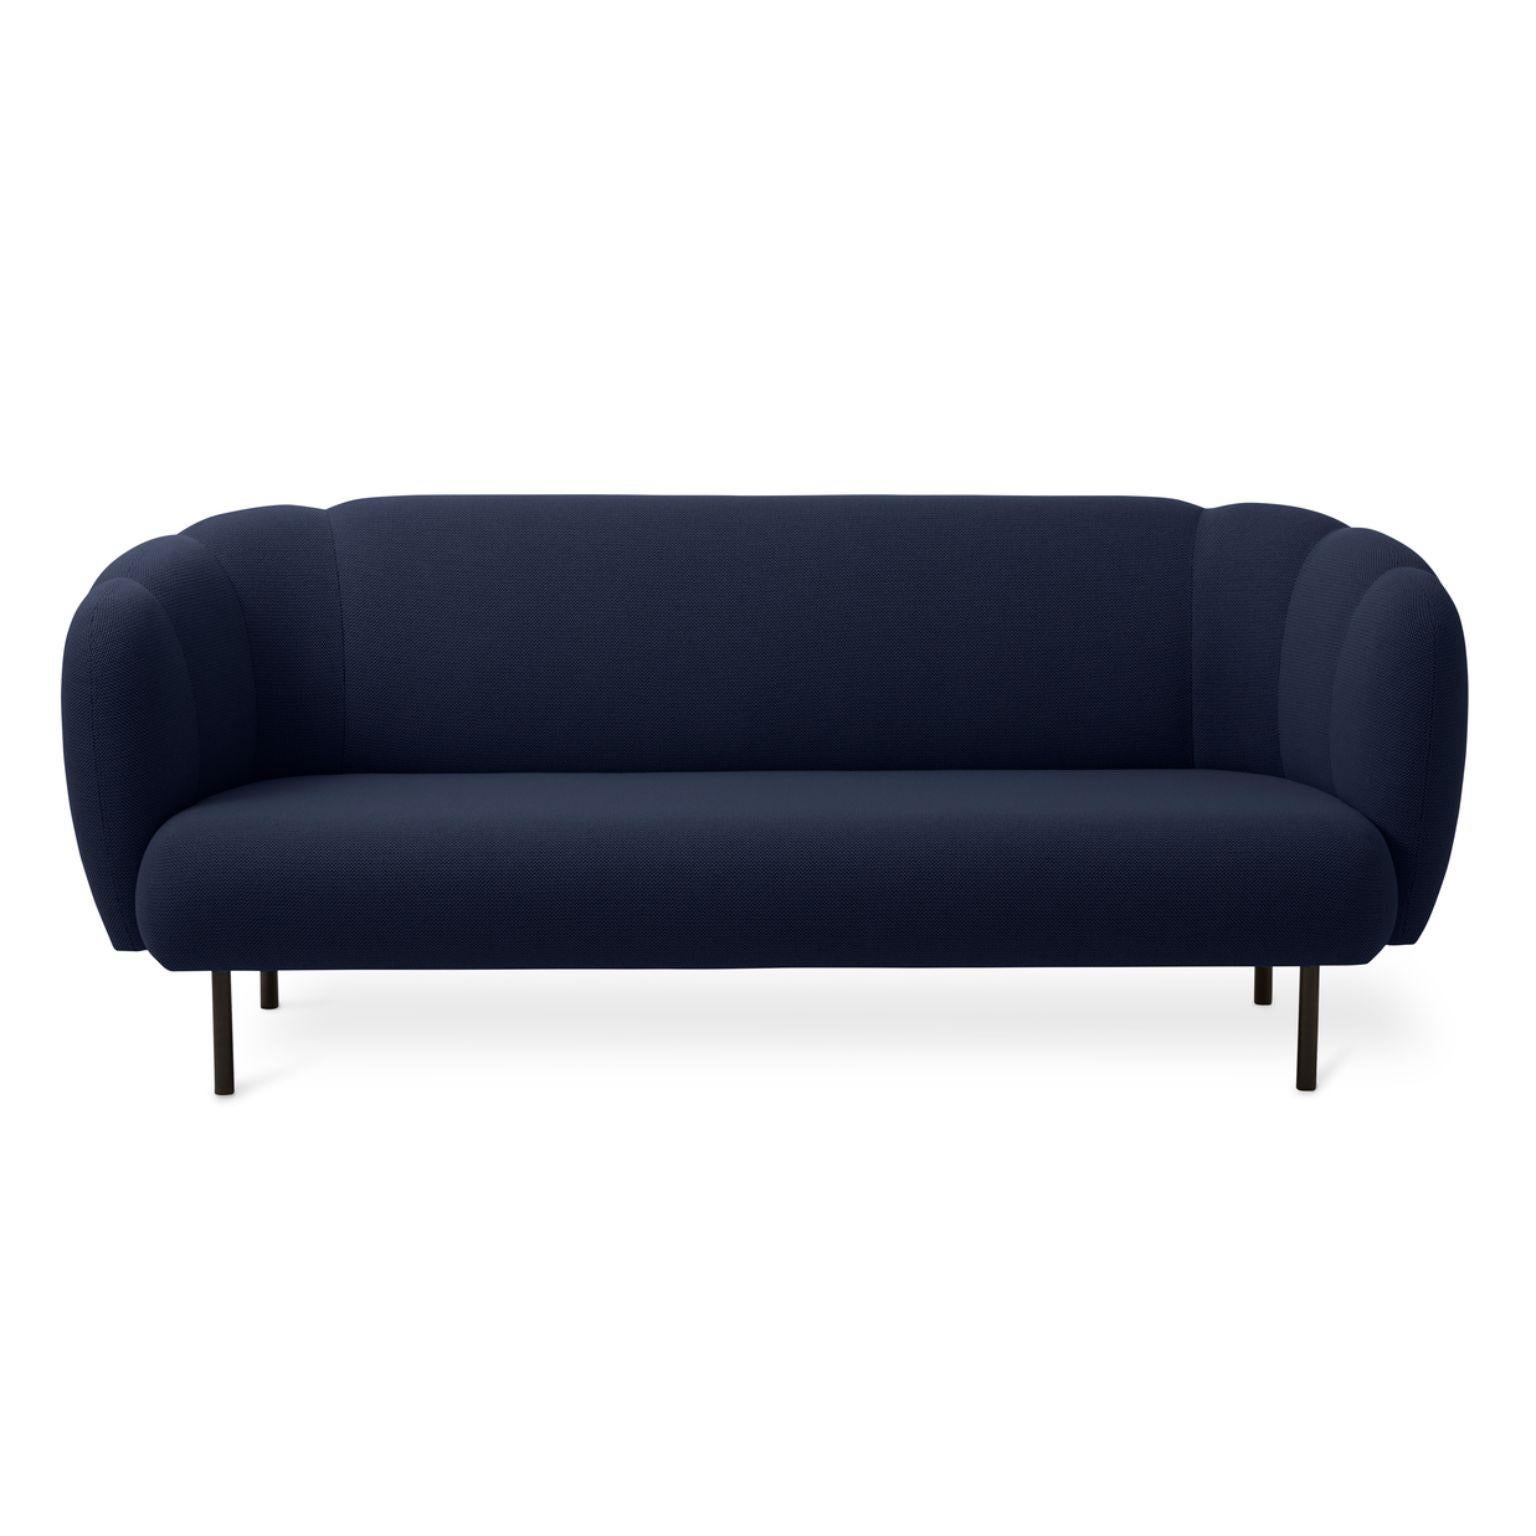 Caper 3 seater with stitches steel blue by Warm Nordic
Dimensions: D200 x W84 x H 80 cm
Material: Textile upholstery, Wooden frame, Powder coated black steel legs.
Weight: 55.5 kg
Also available in different colours and finishes.

An elegant